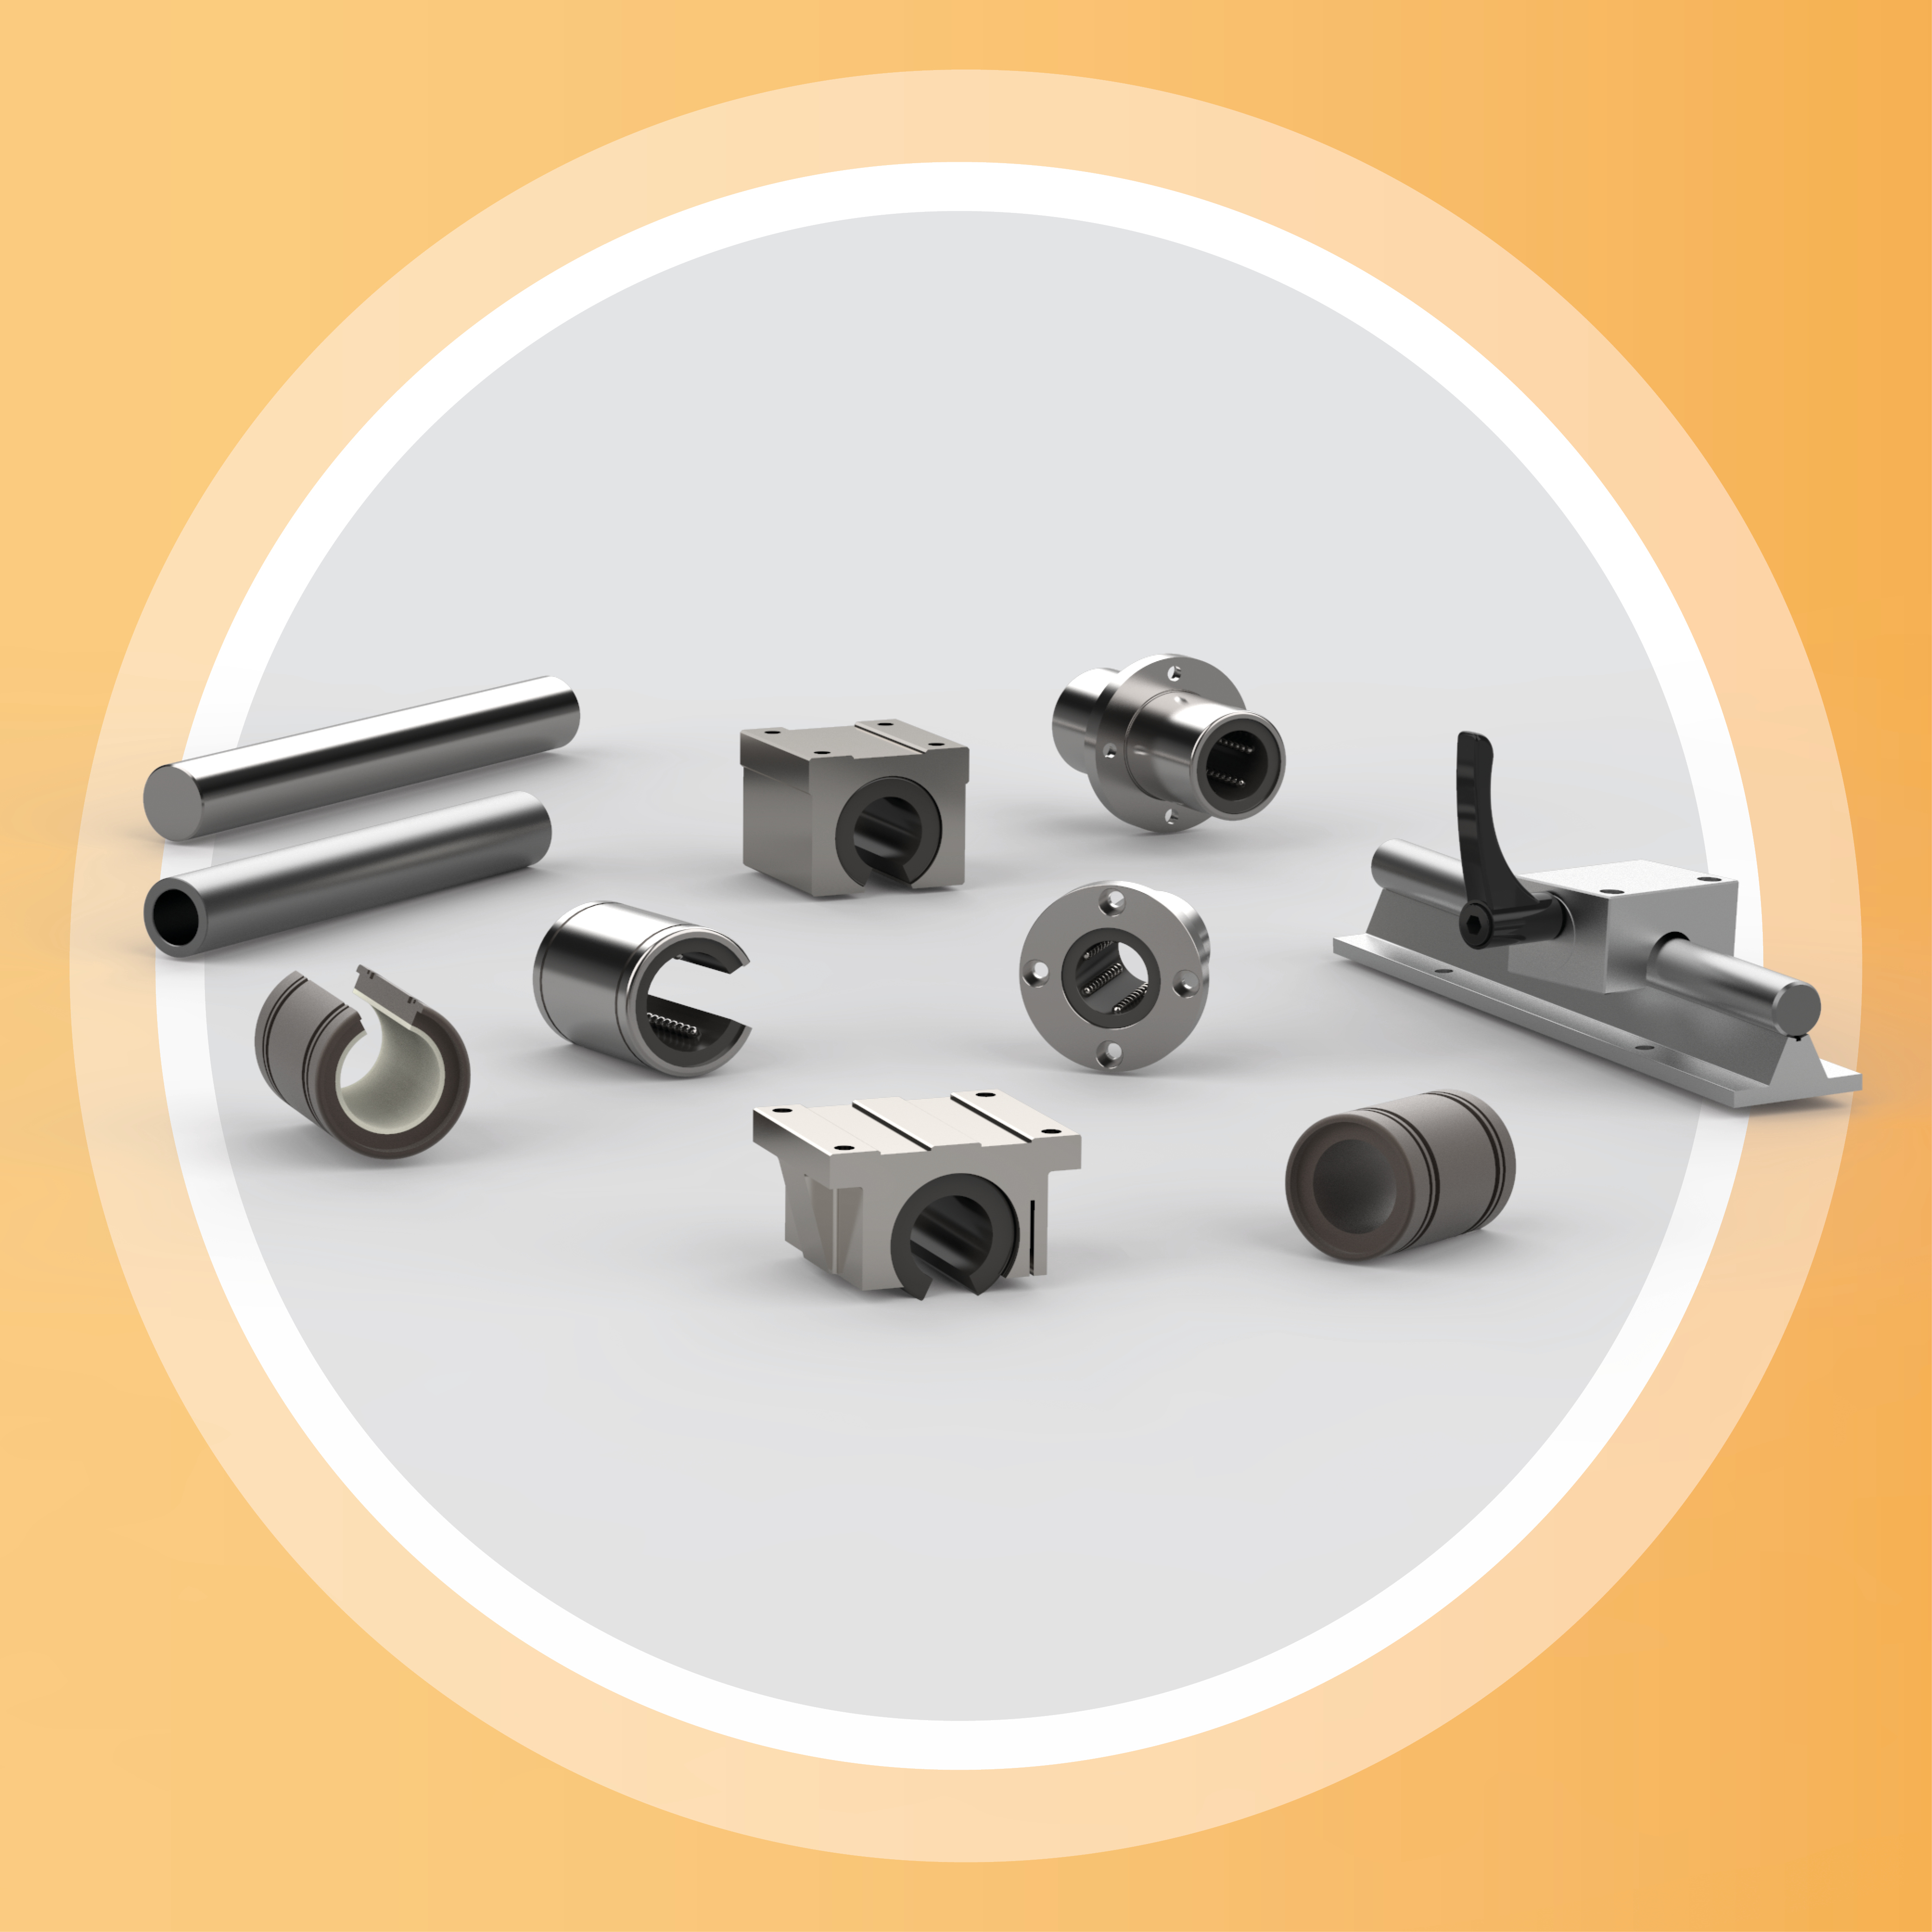 Linear shafts and bearings